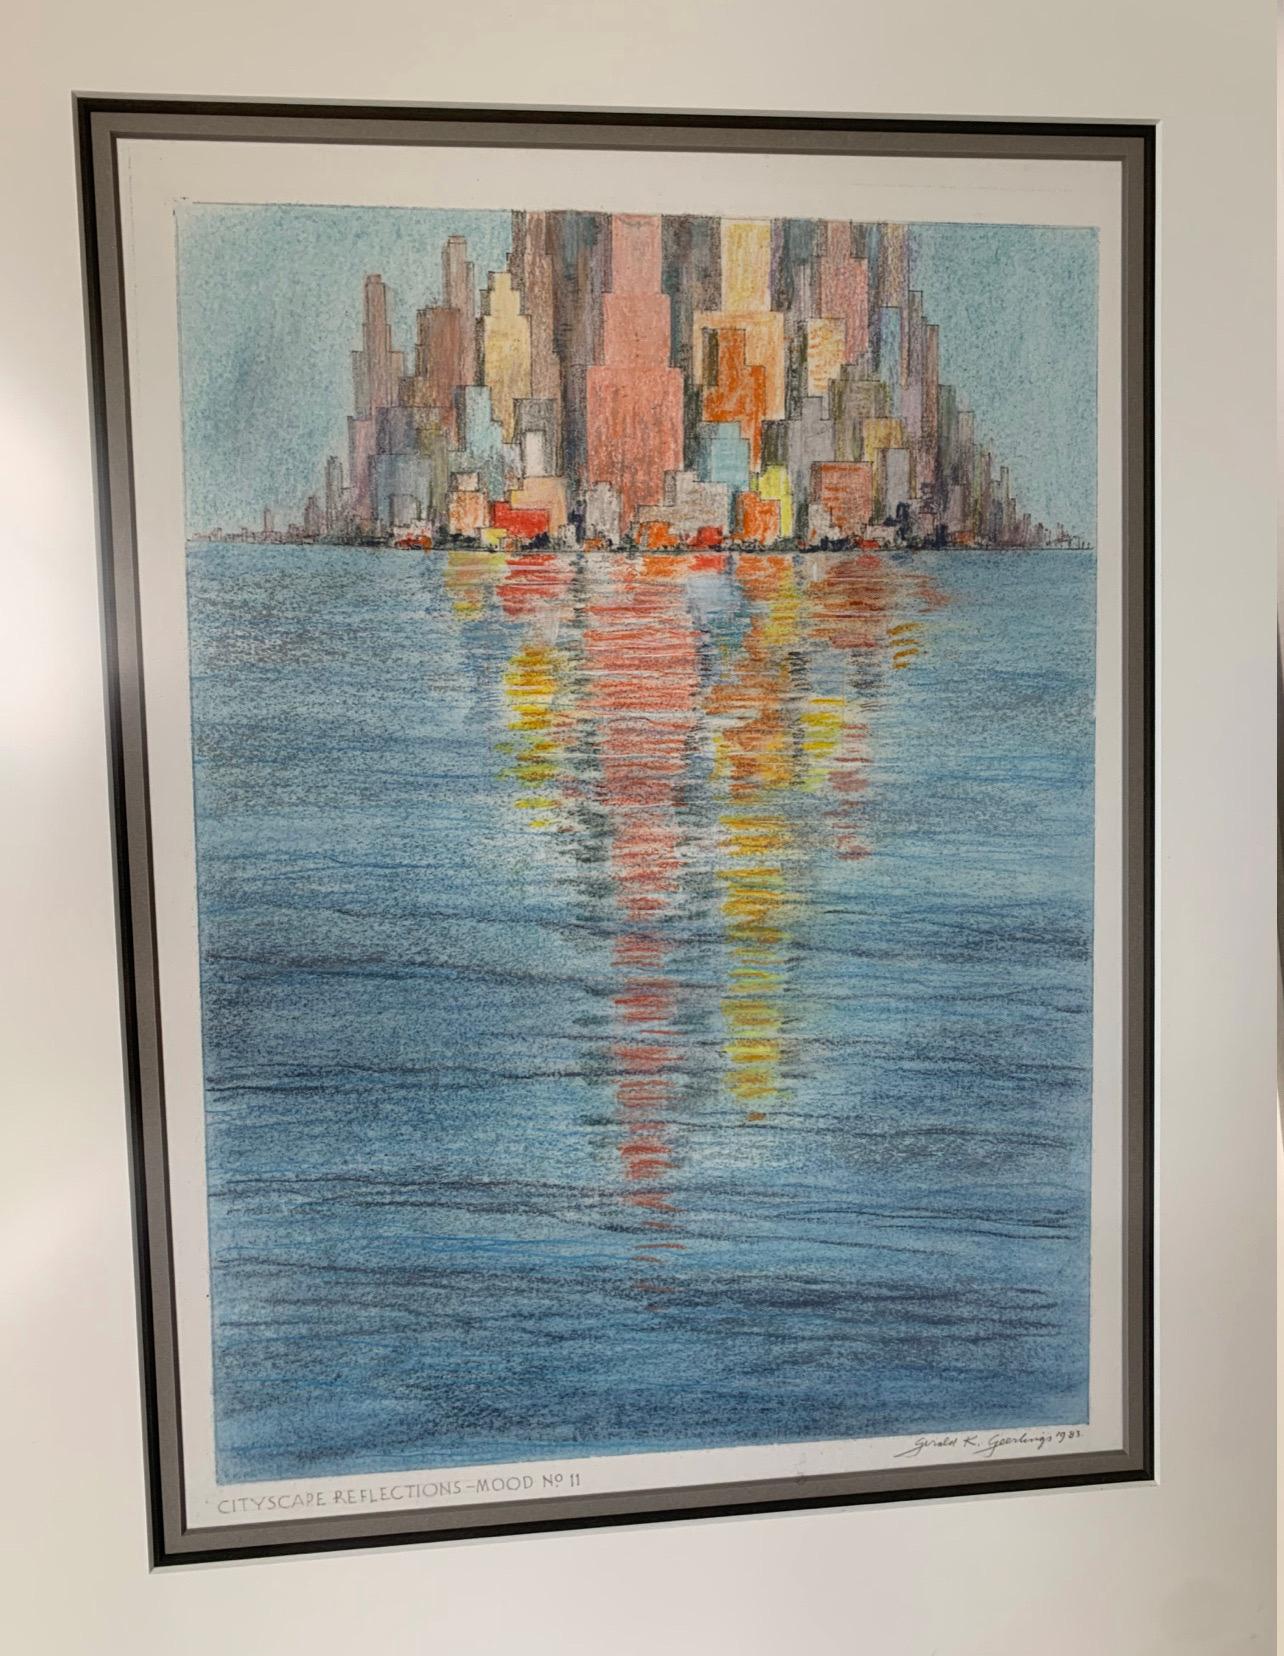 American Cityscape Reflections - Mood No. 11, 1983 Gerald K. Geerlings  For Sale